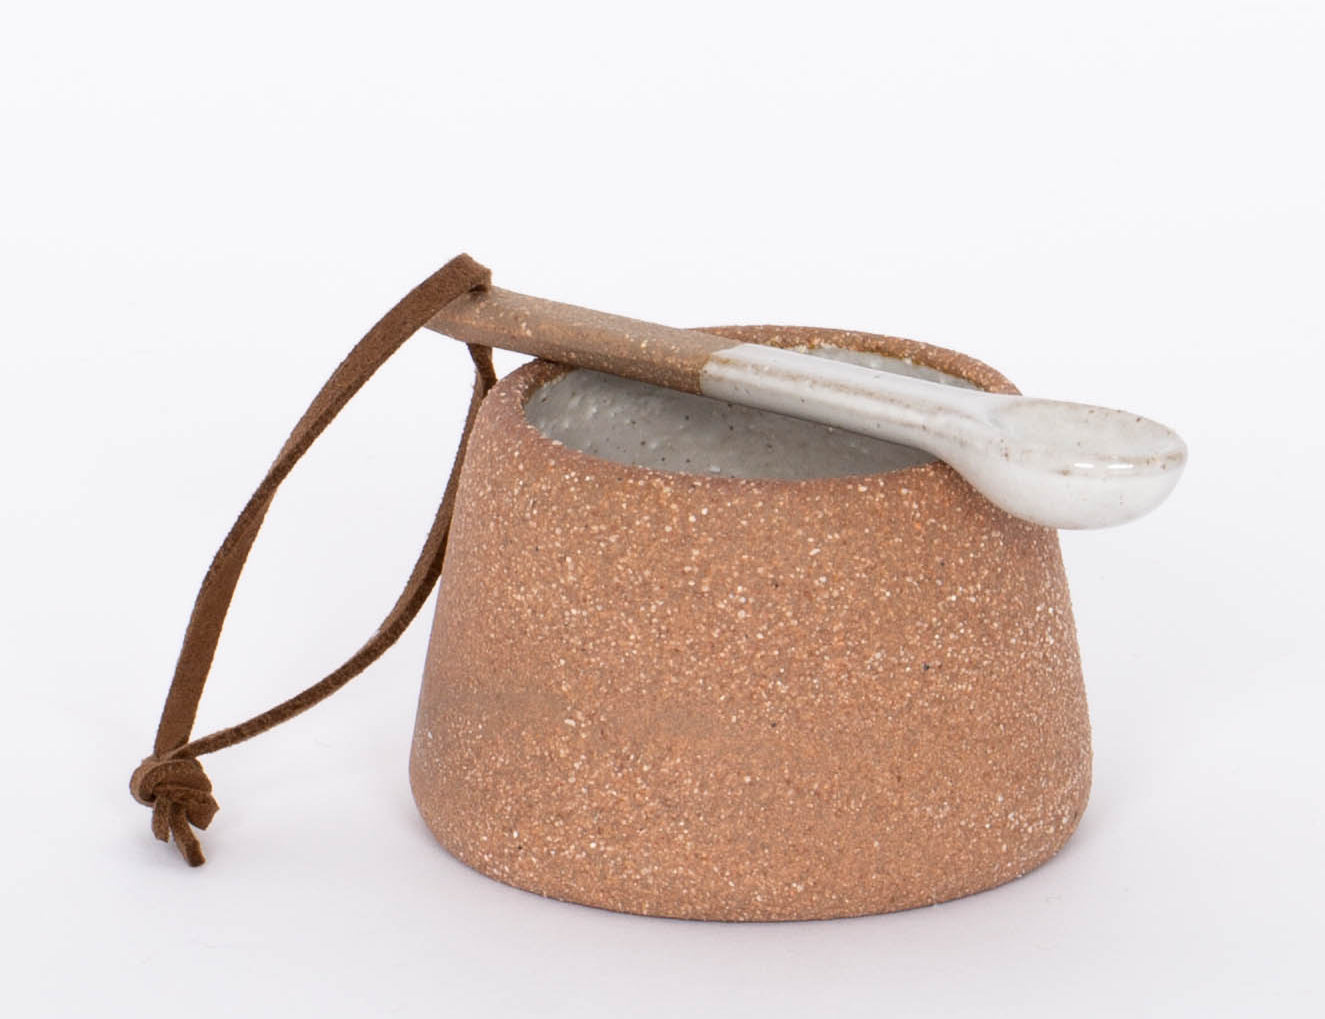 Terracotta Canyon Ceramic Spice Pot by Citrine comes with two tone small spoon with leather handle. 